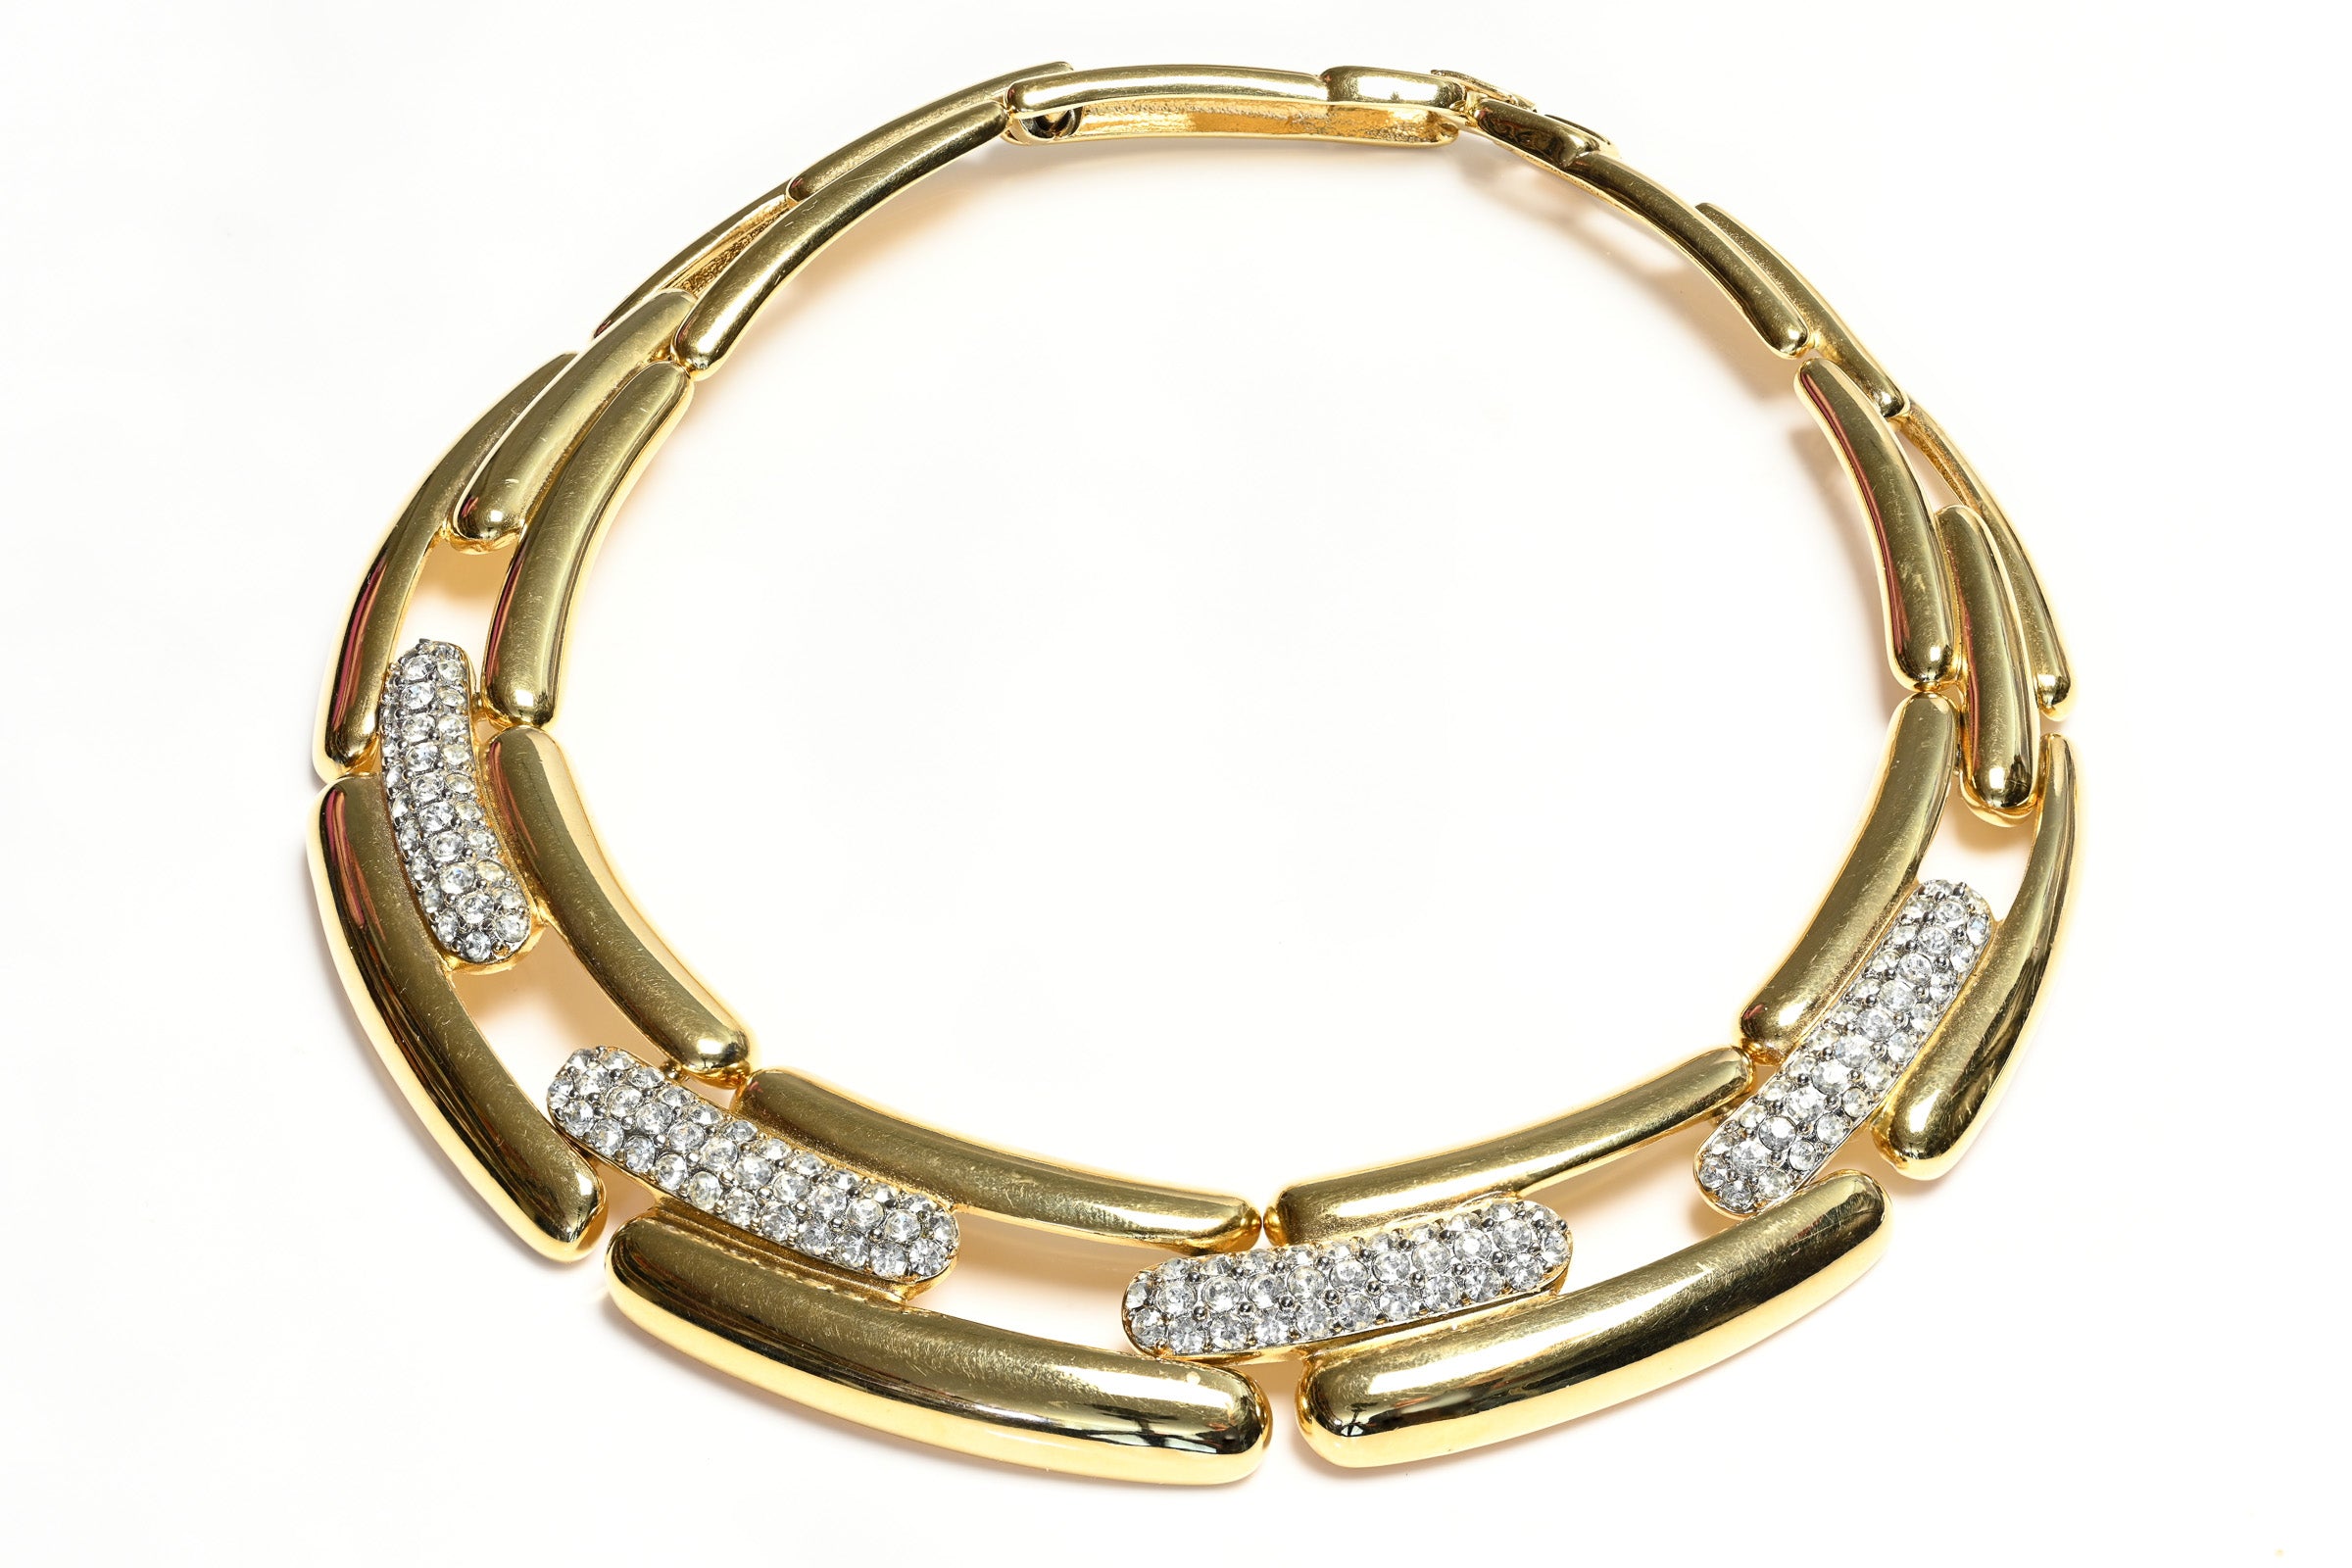 Vintage Givenchy Paris Wide Gold Plated Crystal Collar Necklace